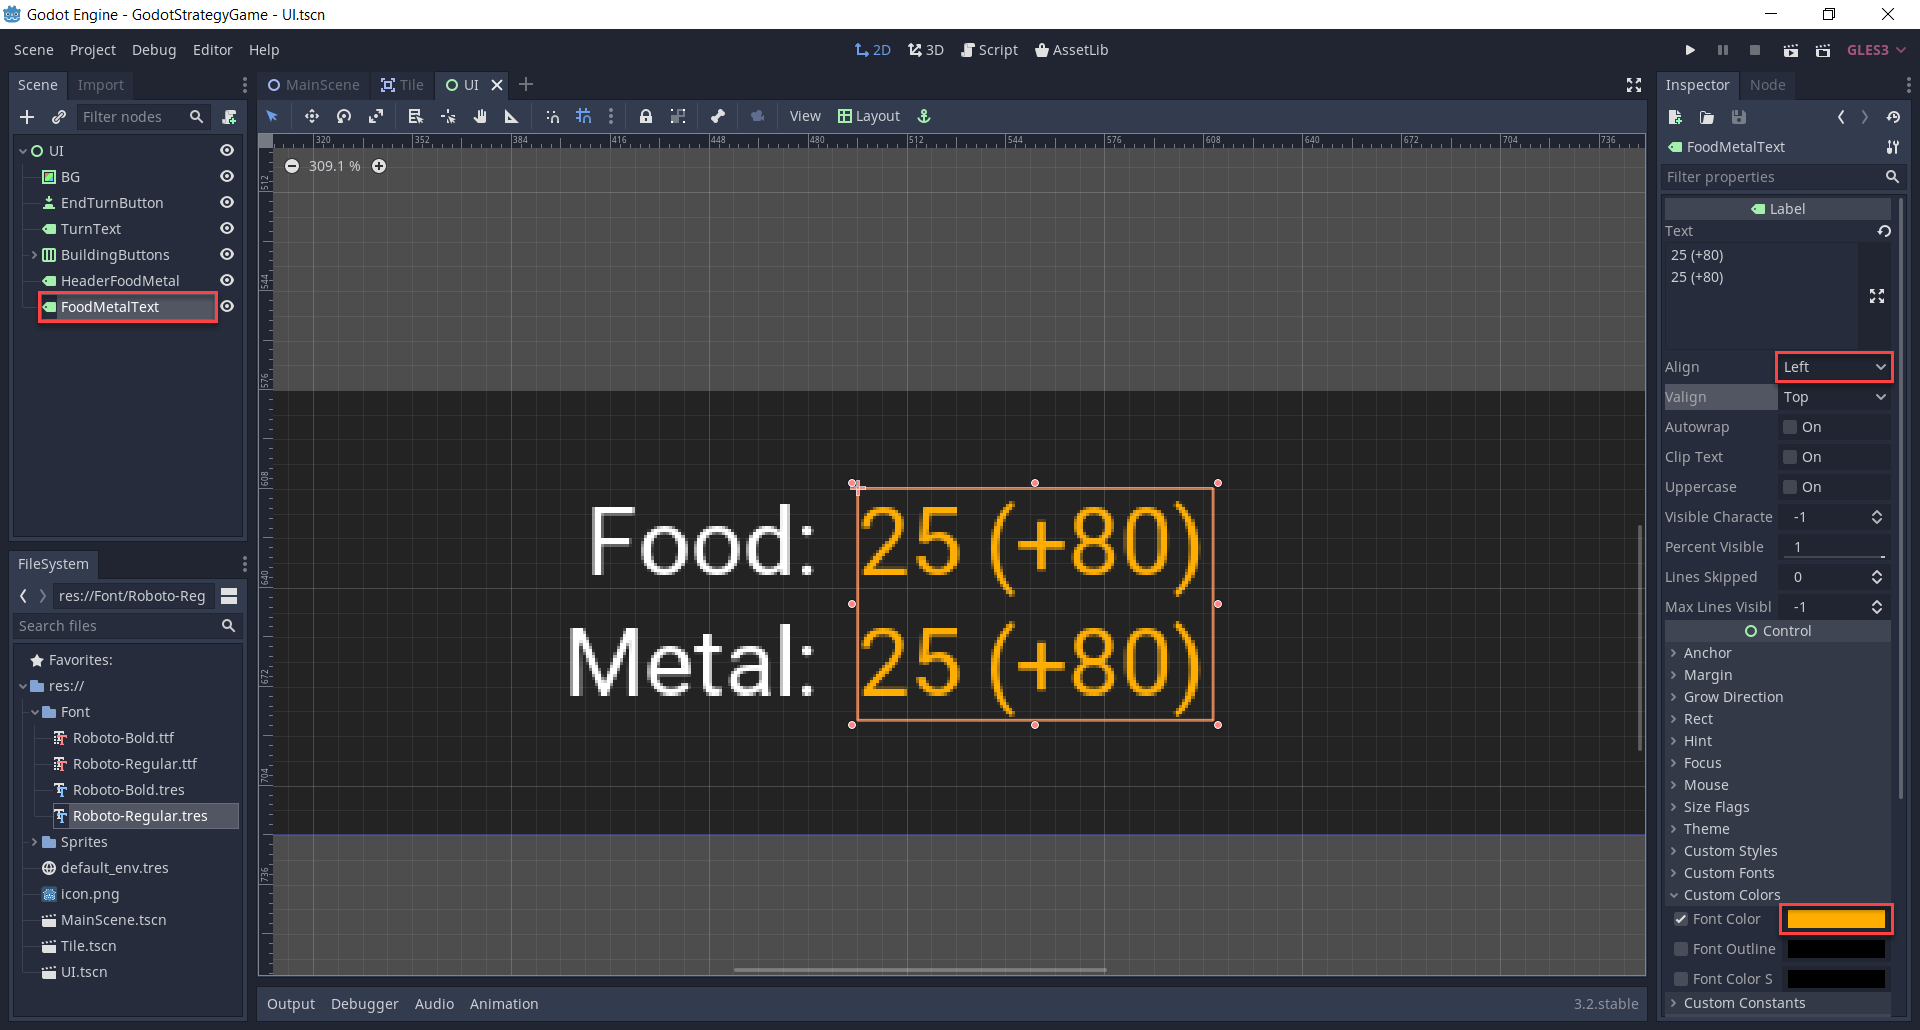 Creating the resource values for the food and metal.